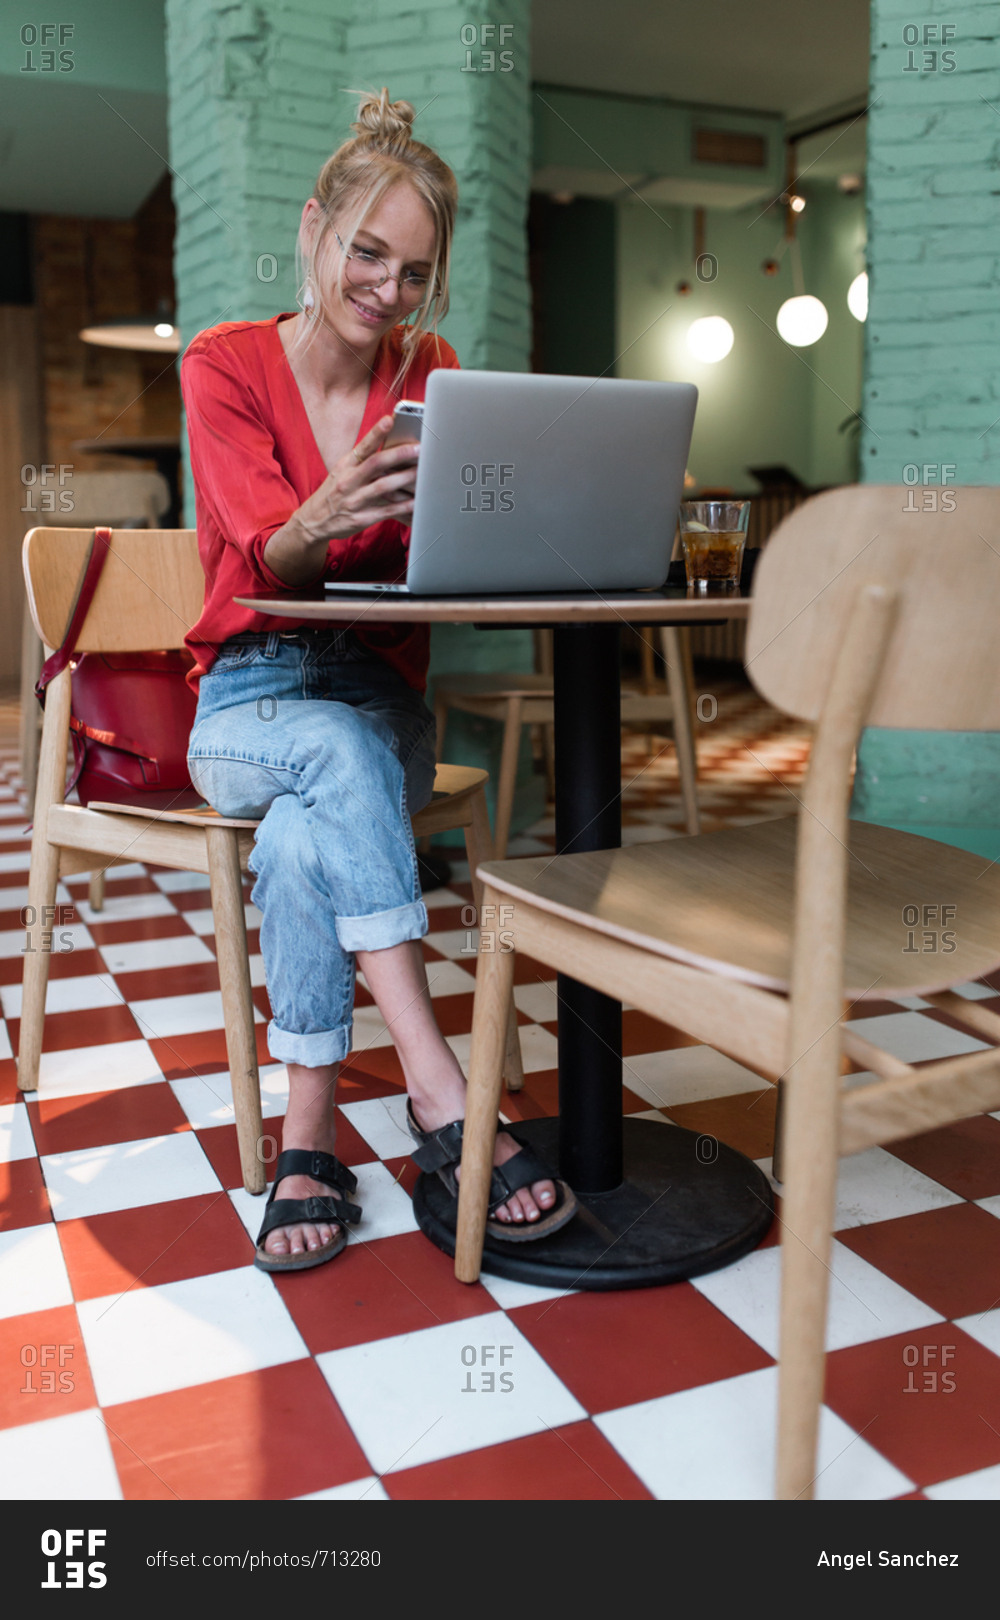 Vintage blonde girl with a bow and red shirt using her phone while smile in a coffee bar